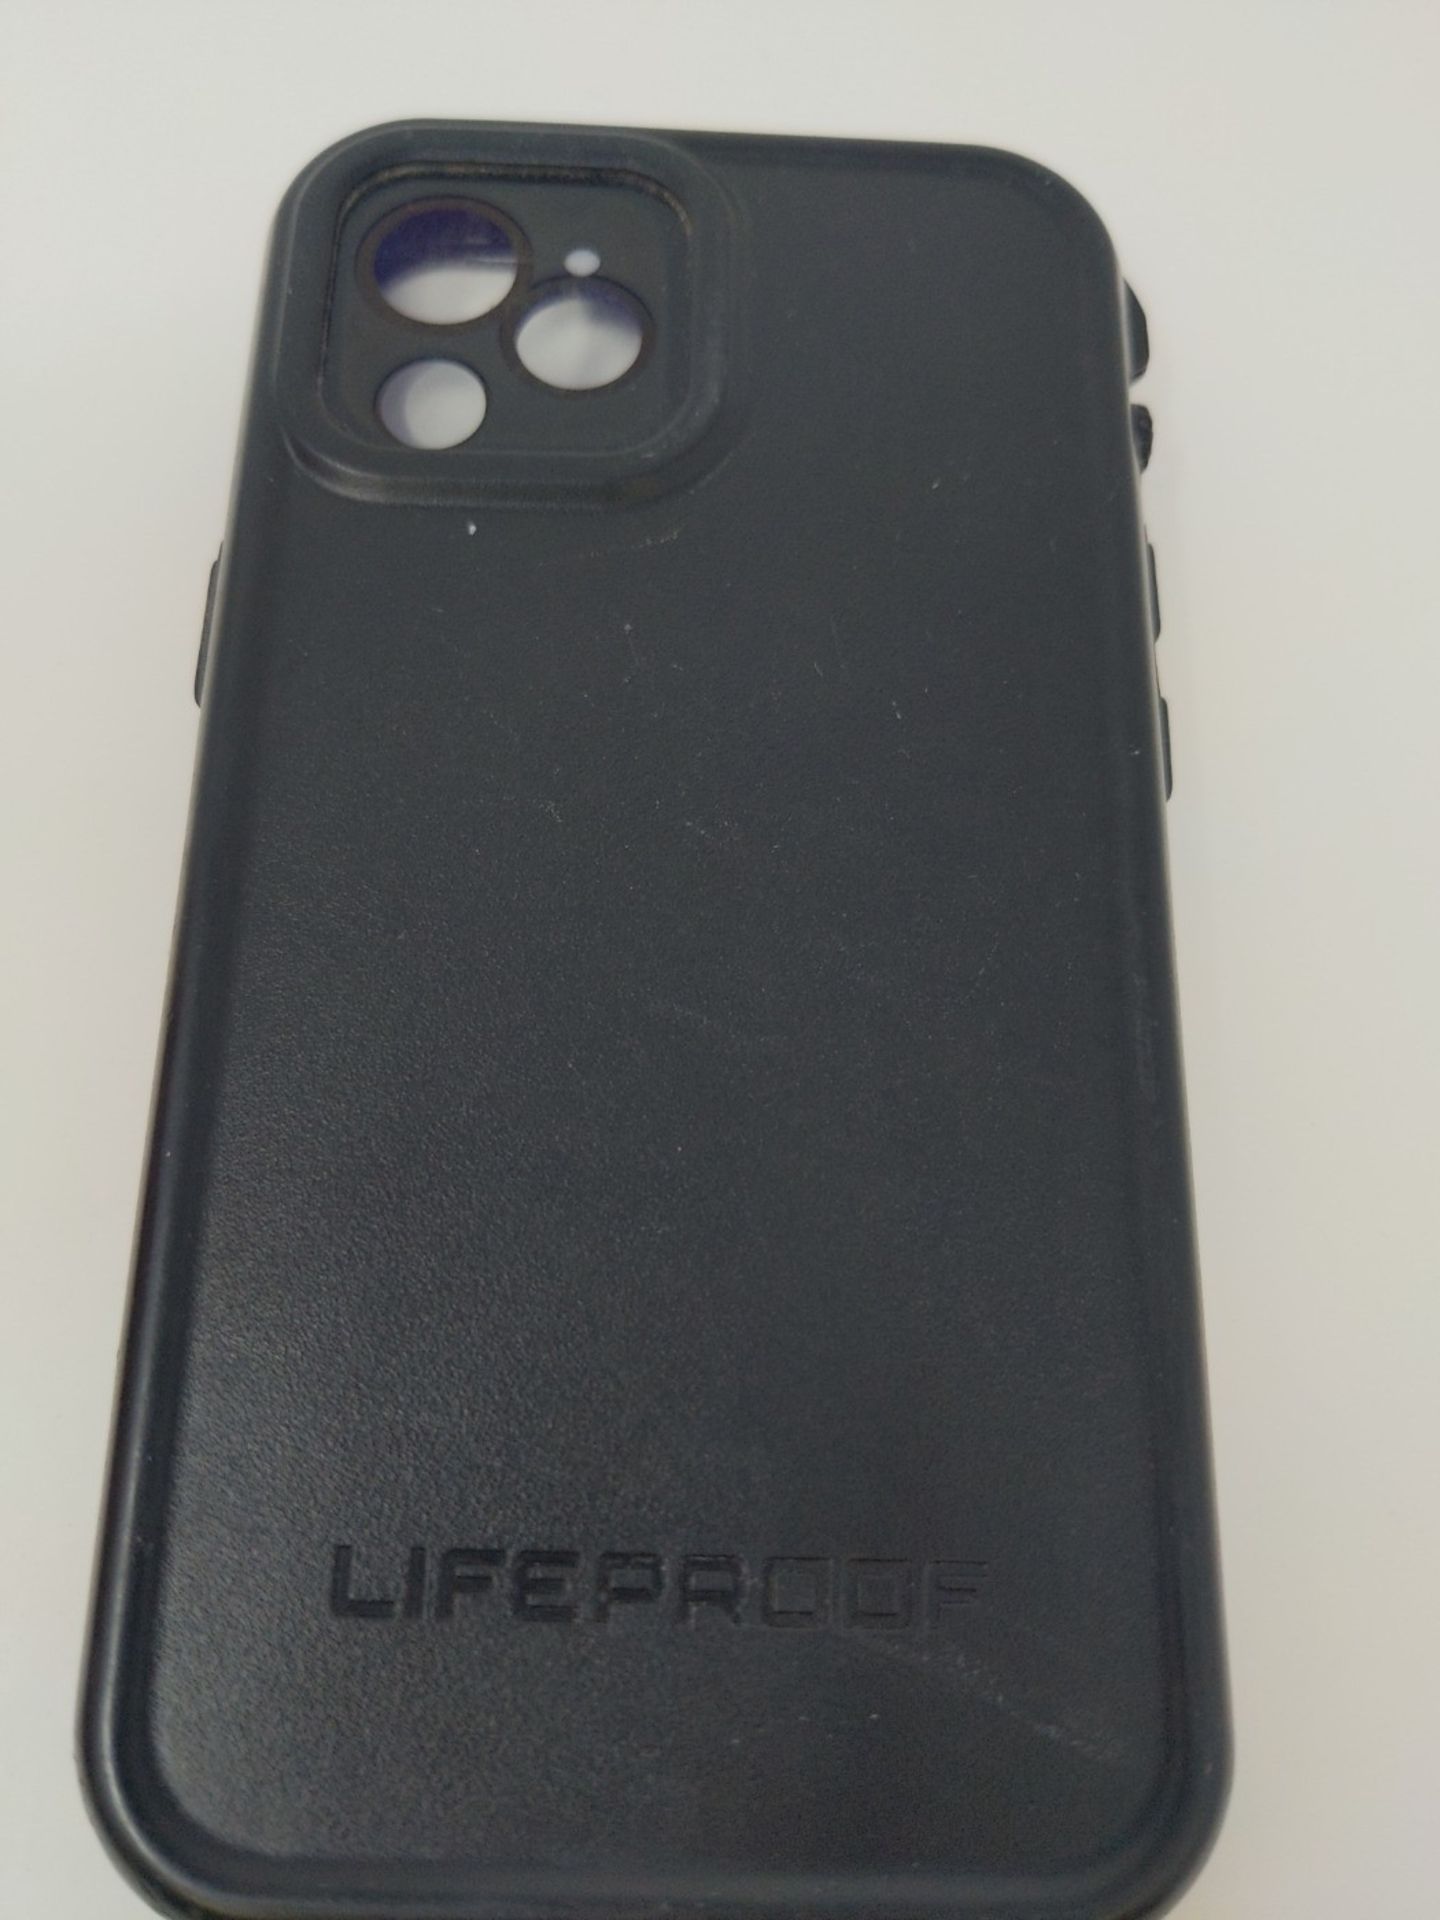 LifeProof 77-65361 for iPhone 12 mini, Waterproof Drop Protective Case, Fre Series, Bl - Image 2 of 3